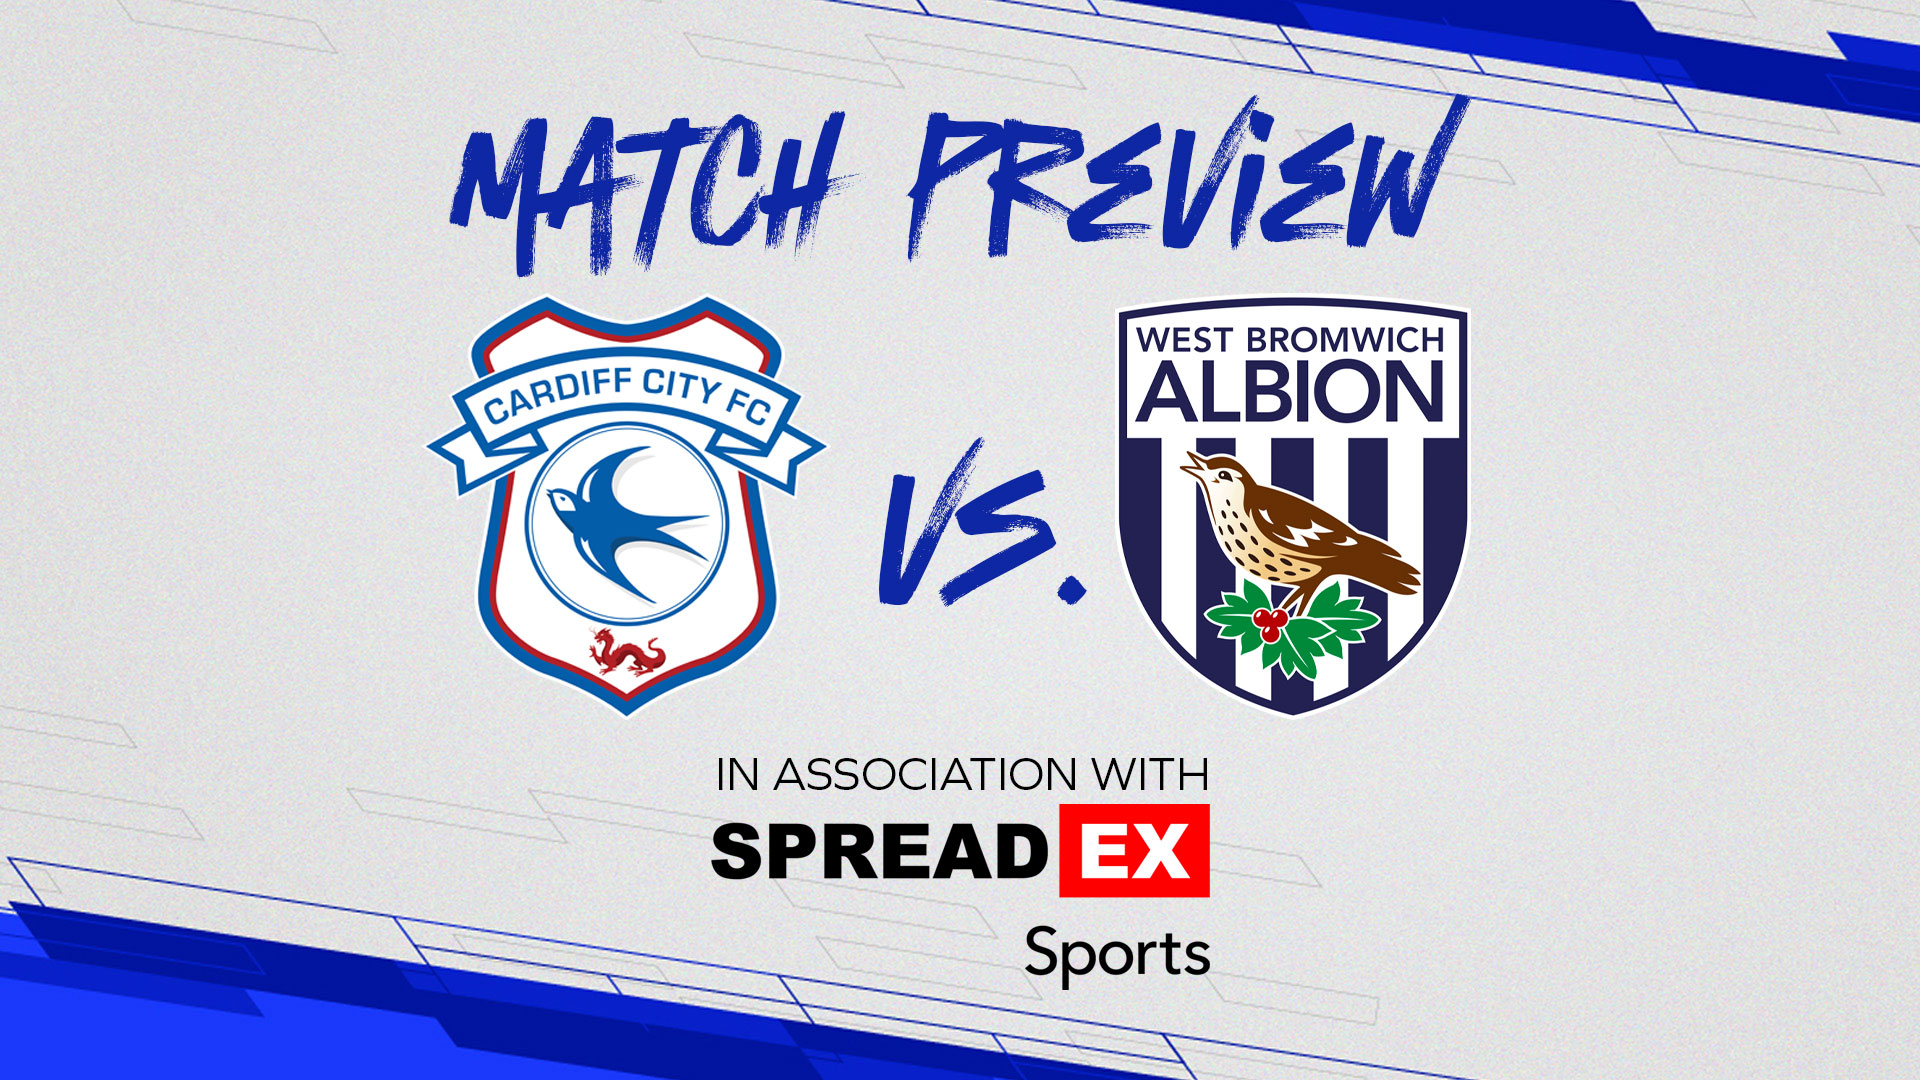 Match Preview: Cardiff City vs. West Bromwich Albion